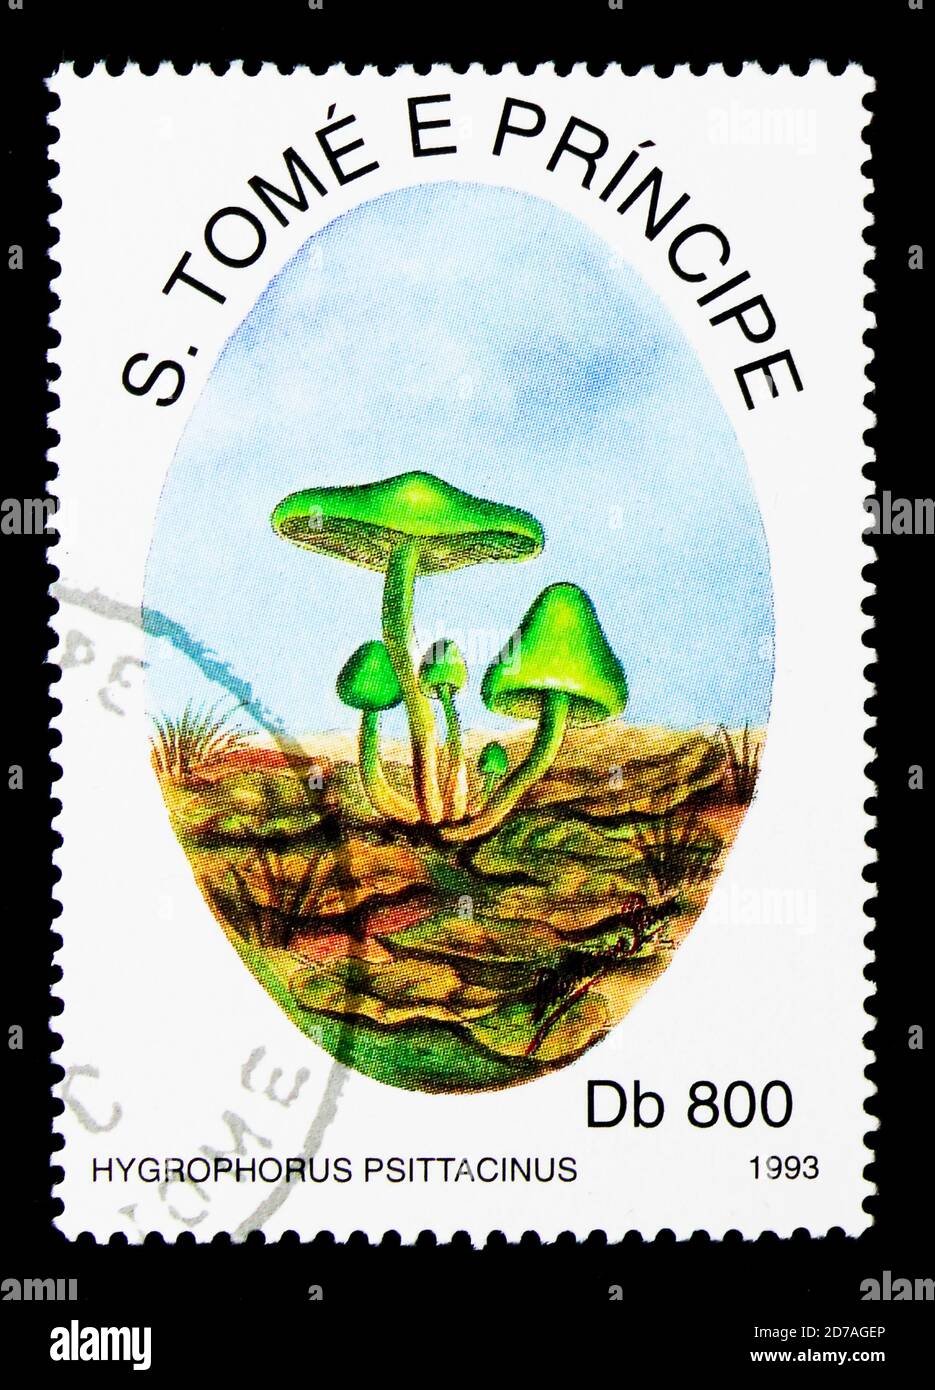 MOSCOW, RUSSIA - NOVEMBER 26, 2017: A stamp printed in Sao Tome and Principe shows Hygrophorus psittacinus, Mushrooms serie, circa 1993 Stock Photo